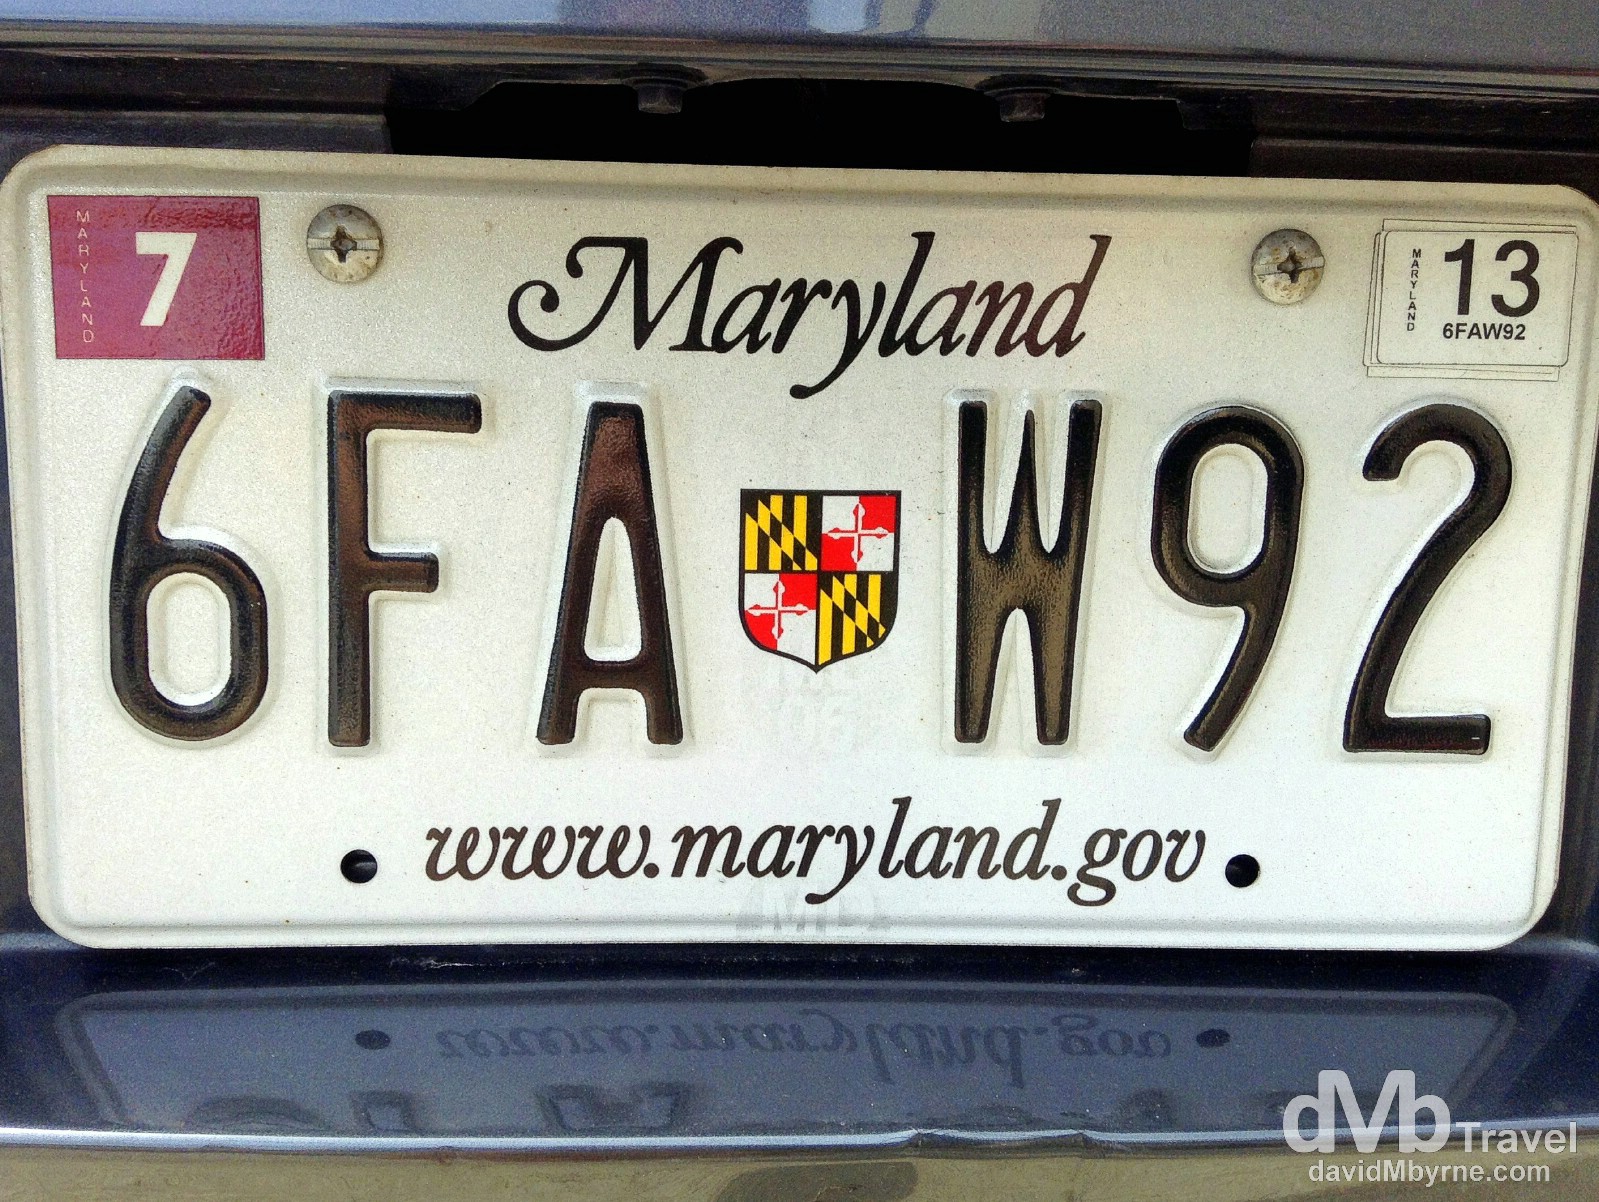 A licence plate on the streets of Baltimore, Maryland, USA. July 9th 2013.